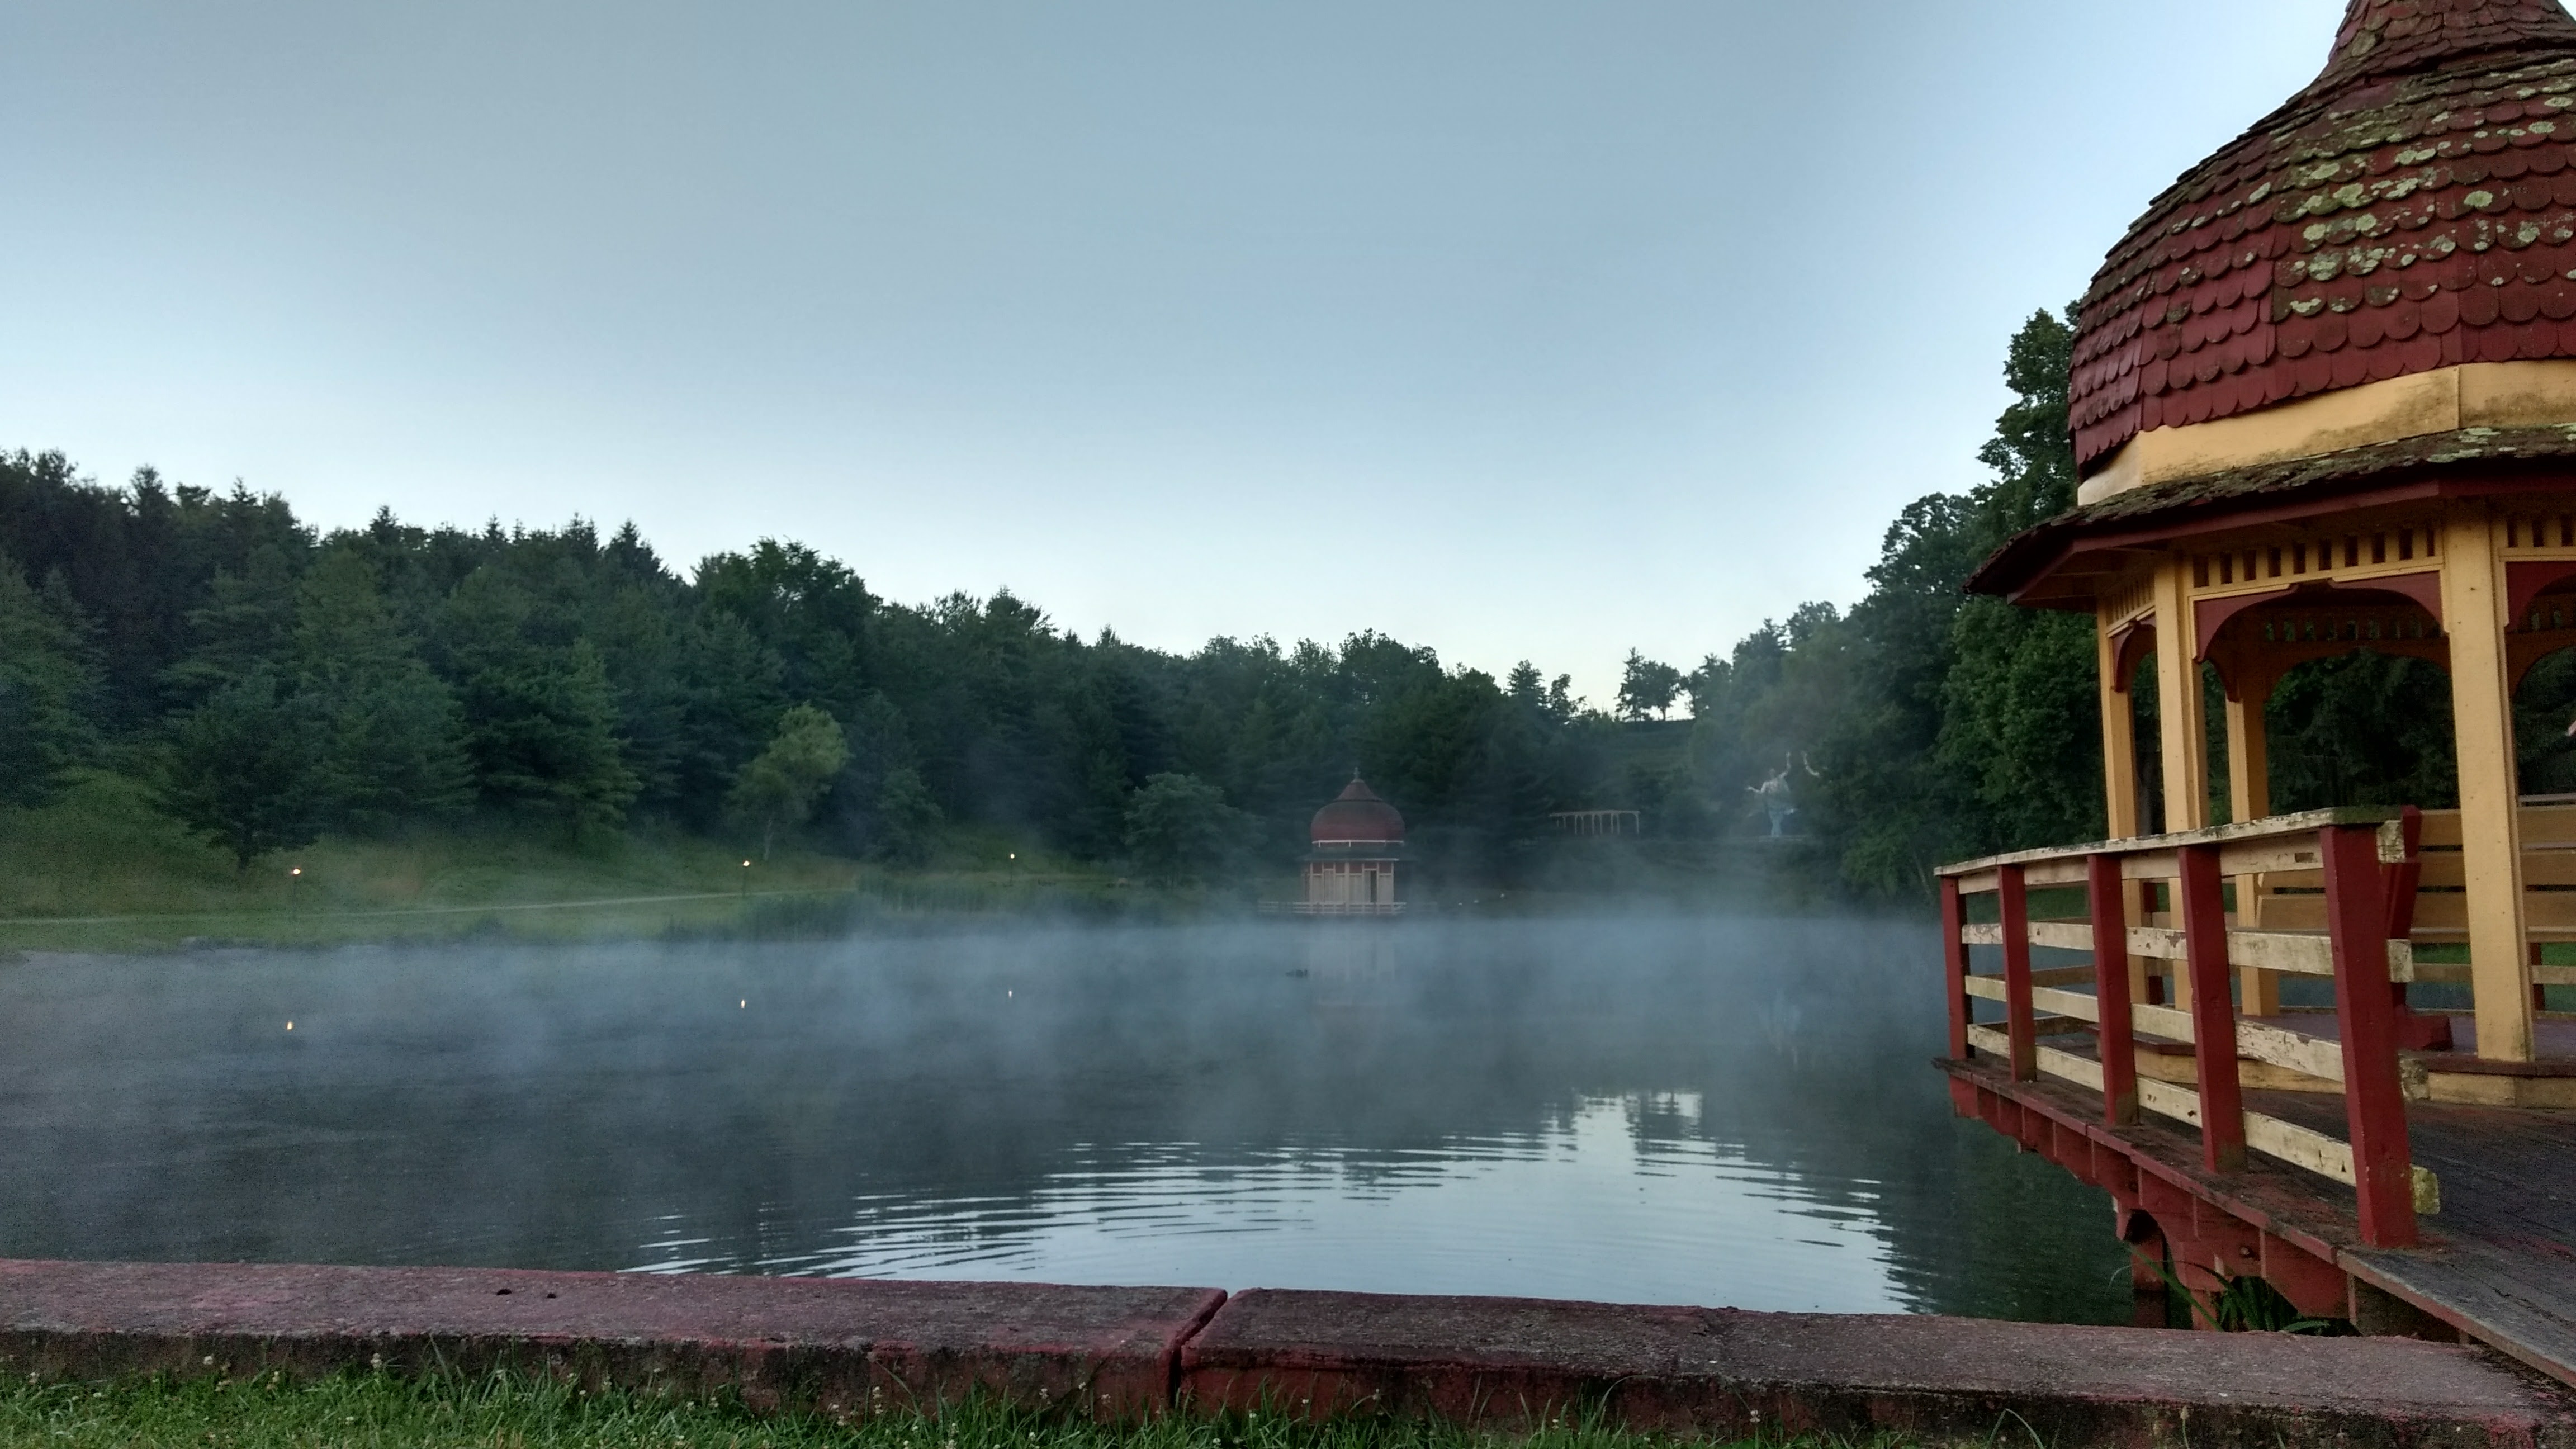 mist rising from a pond, red and yellow pavilions seen in background and foreground.